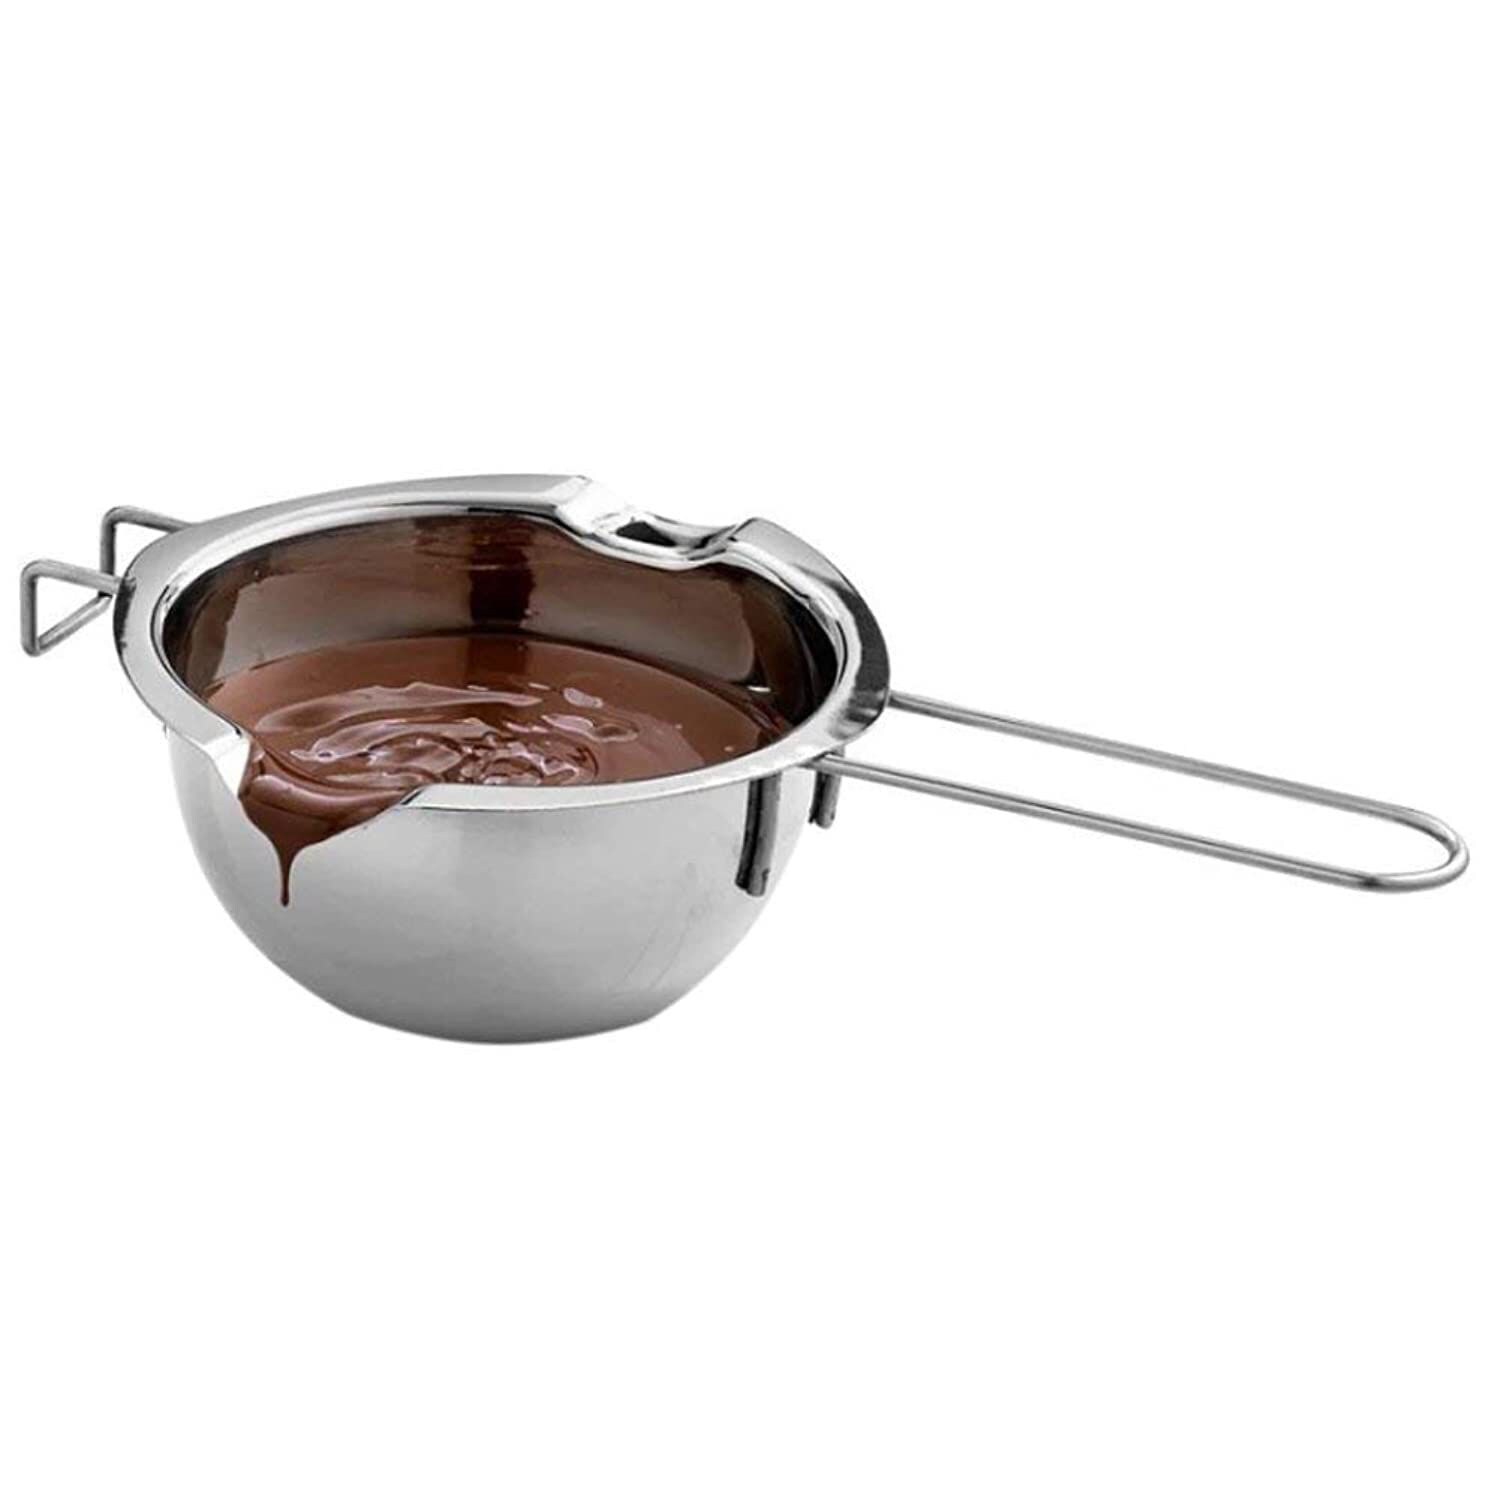 https://assets.dragonmart.ae//pictures/0767986_stainless-steel-chocolate-melting-pot-silver-ssz176.jpeg